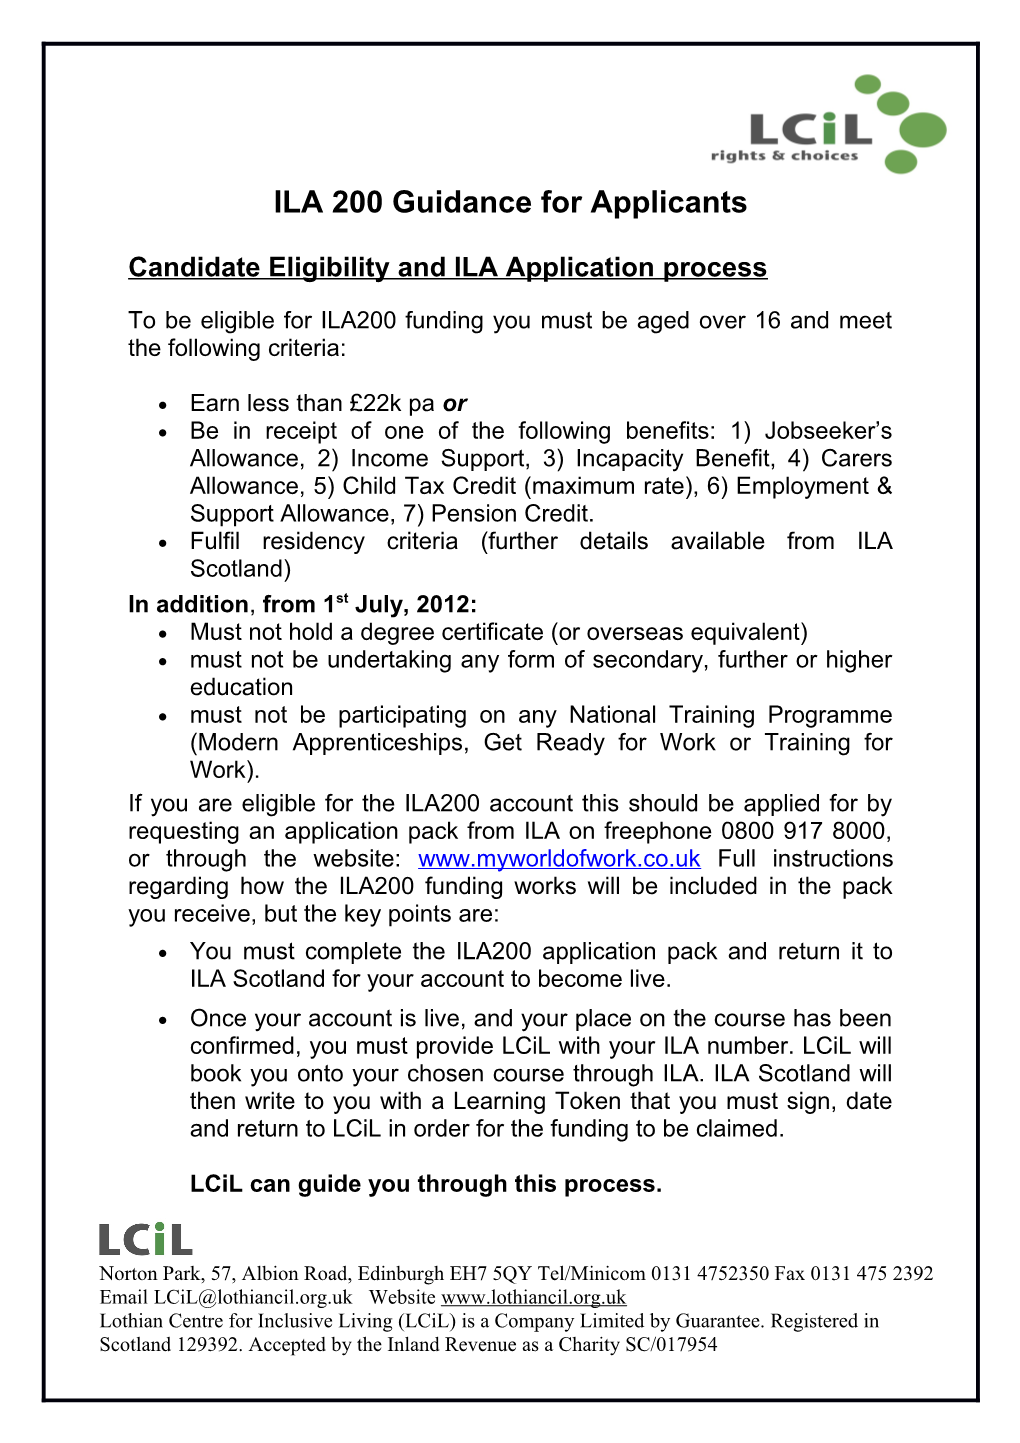 Candidate Eligibility and ILA Application Process